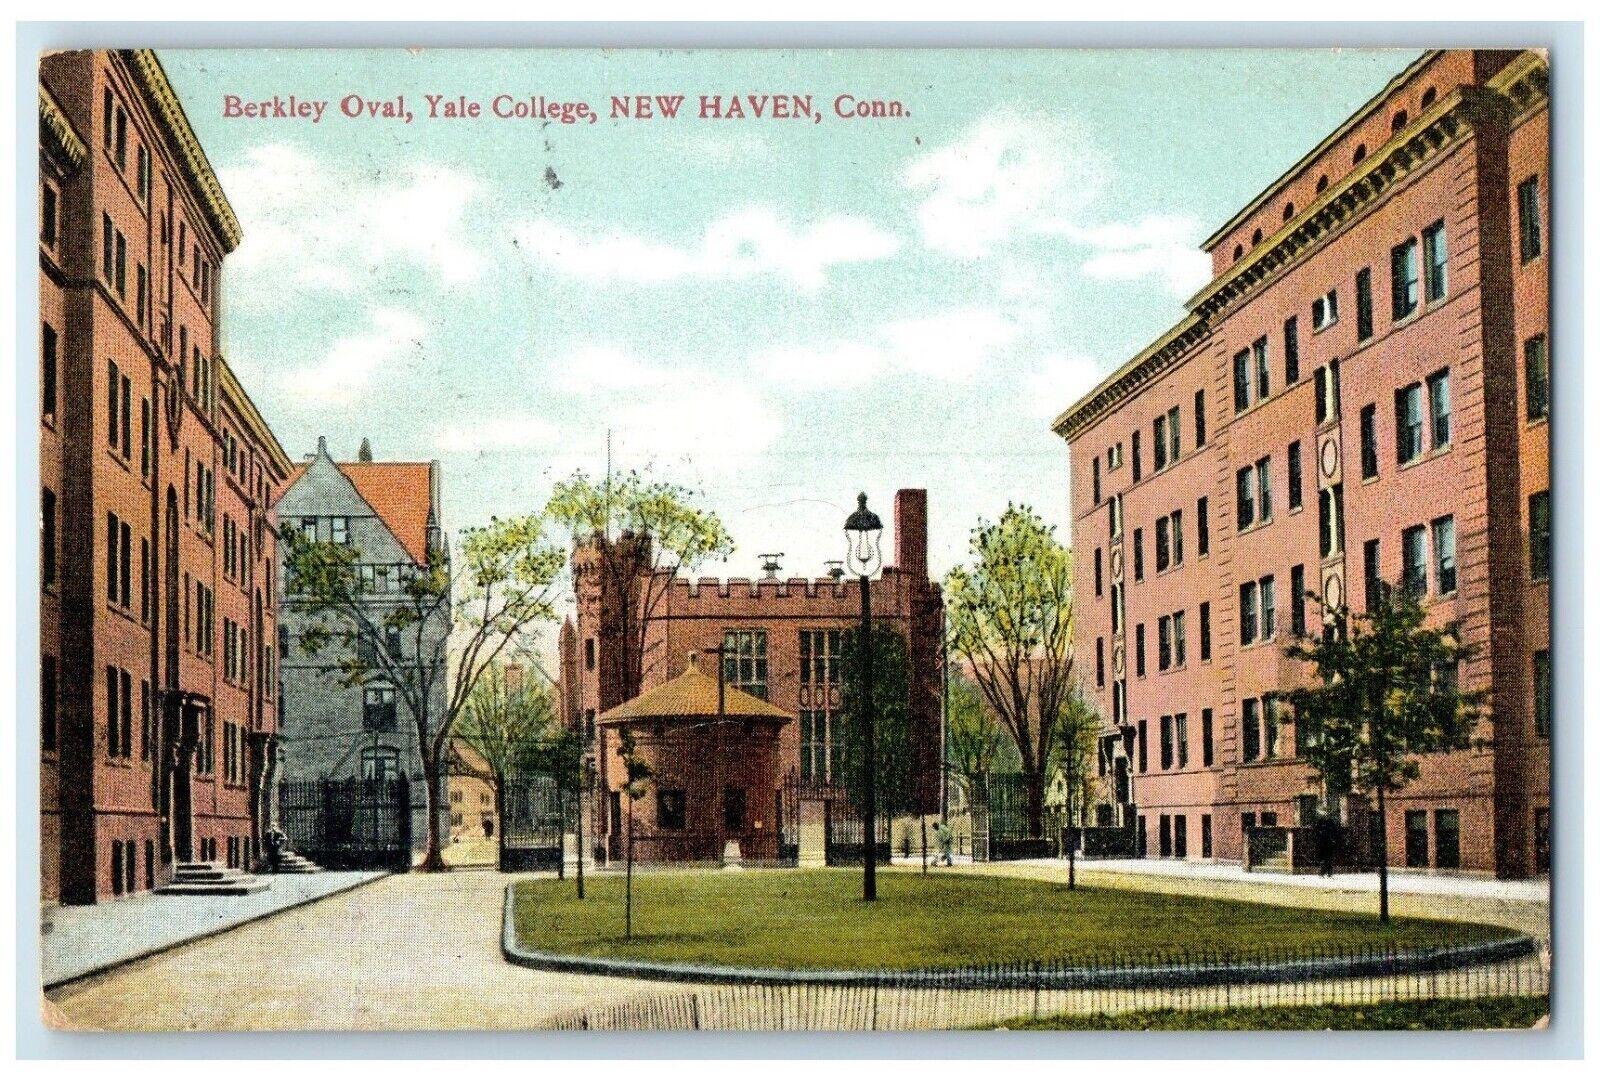 1909 Berkley Oval Yale College Building New Haven Connecticut CT Posted Postcard